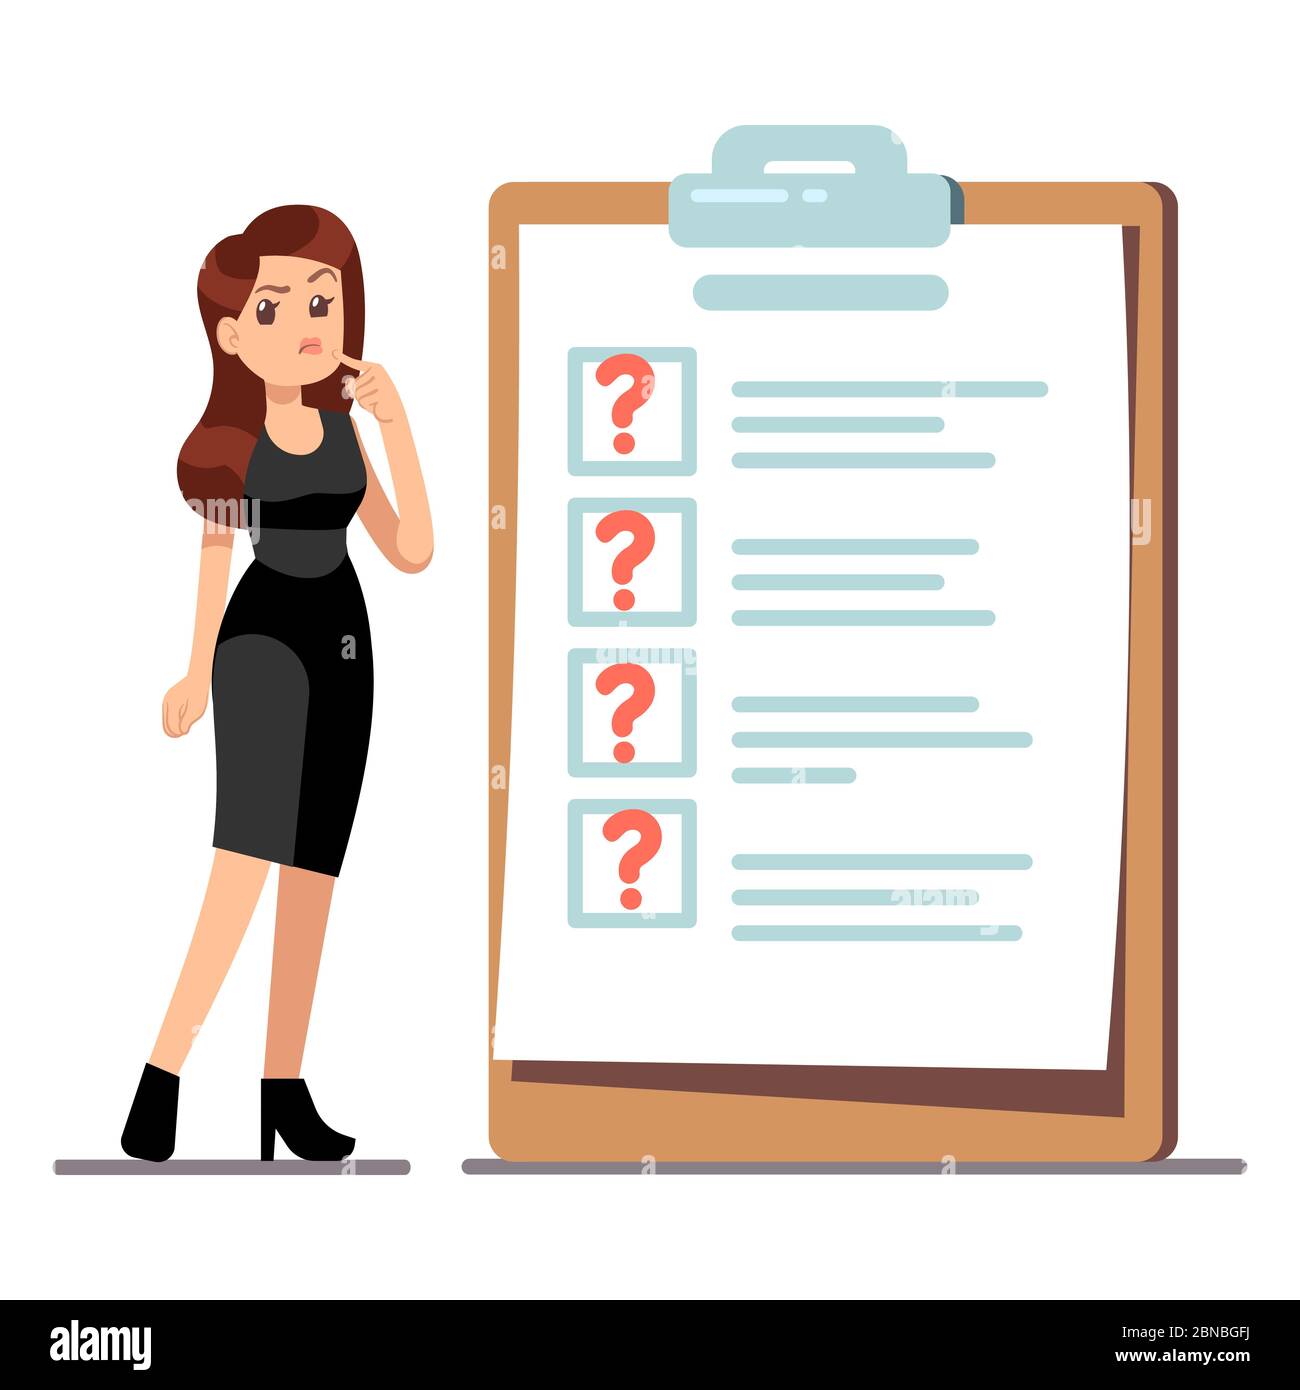 Cartoon young standing woman thinking about time management. Businesswoman have problems with her to do list. Illustration of thinking trouble, checklist with question marks Stock Vector